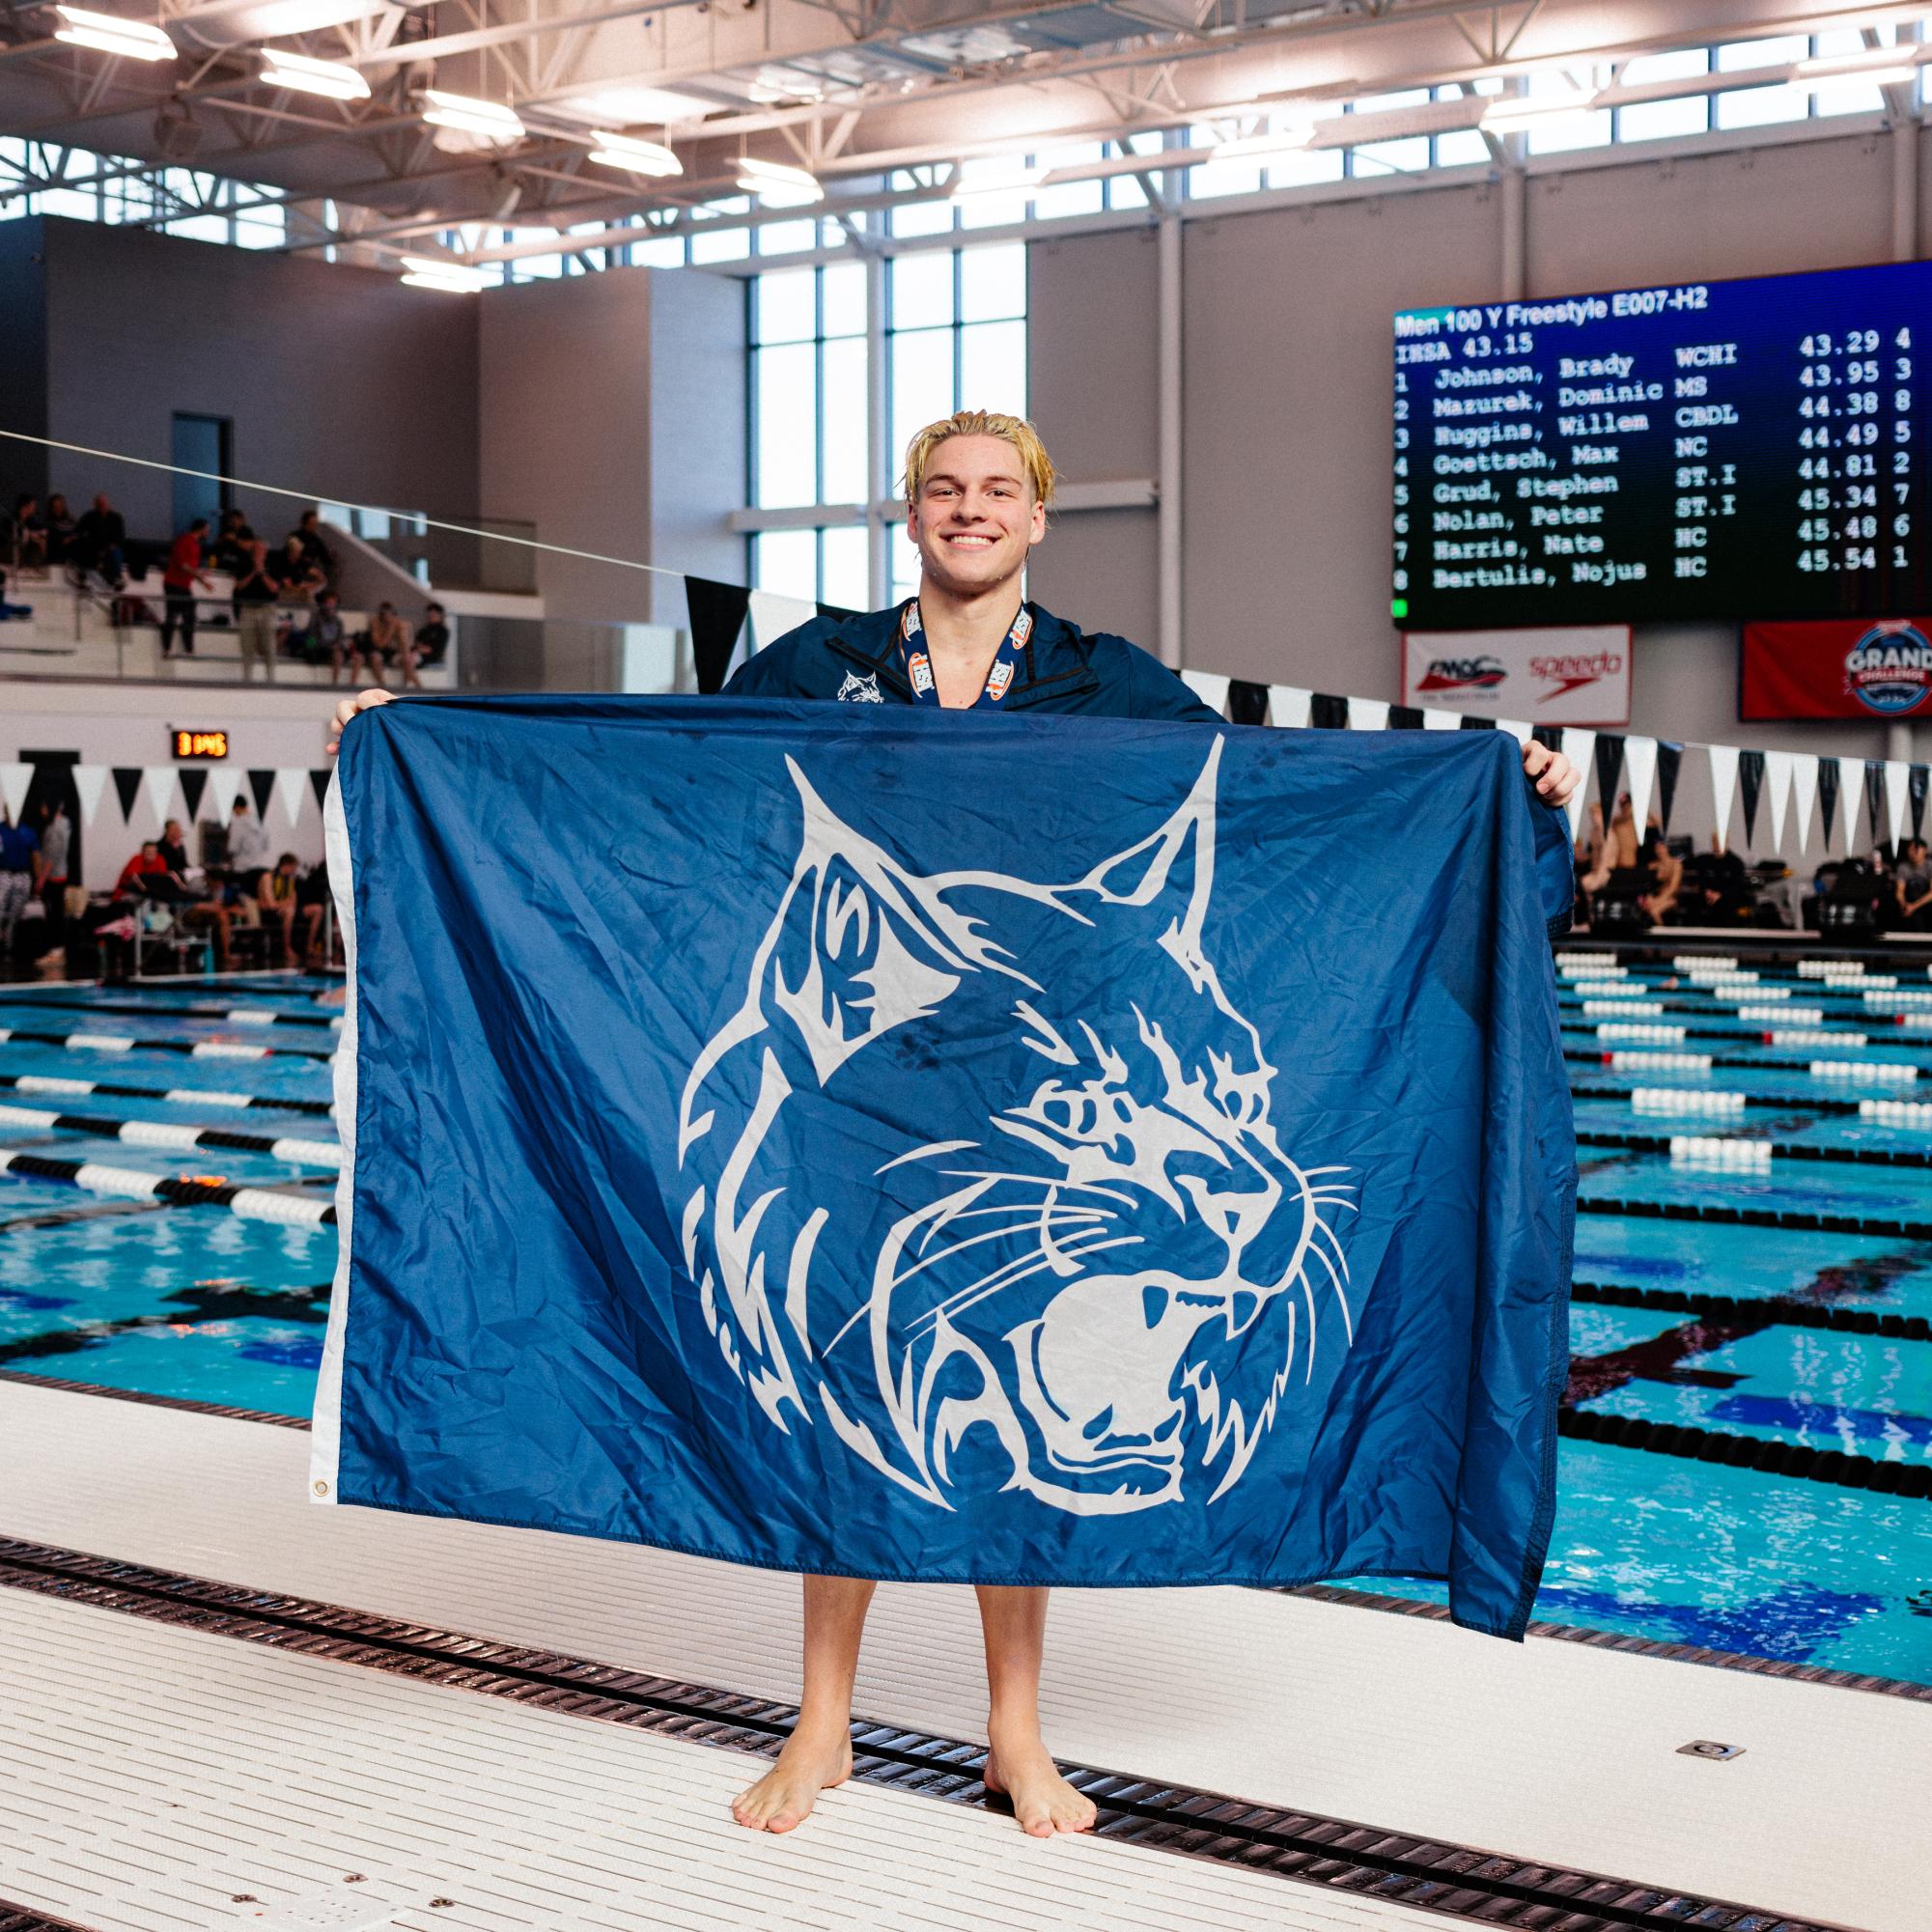 Senior Brady Johnson proudly unfurls a Wildcat flag in celebration of his first first-place finish of the day, clocking a 43.29 -only .14 shy of the state record he himself set just one day earlier- in the 100 free.